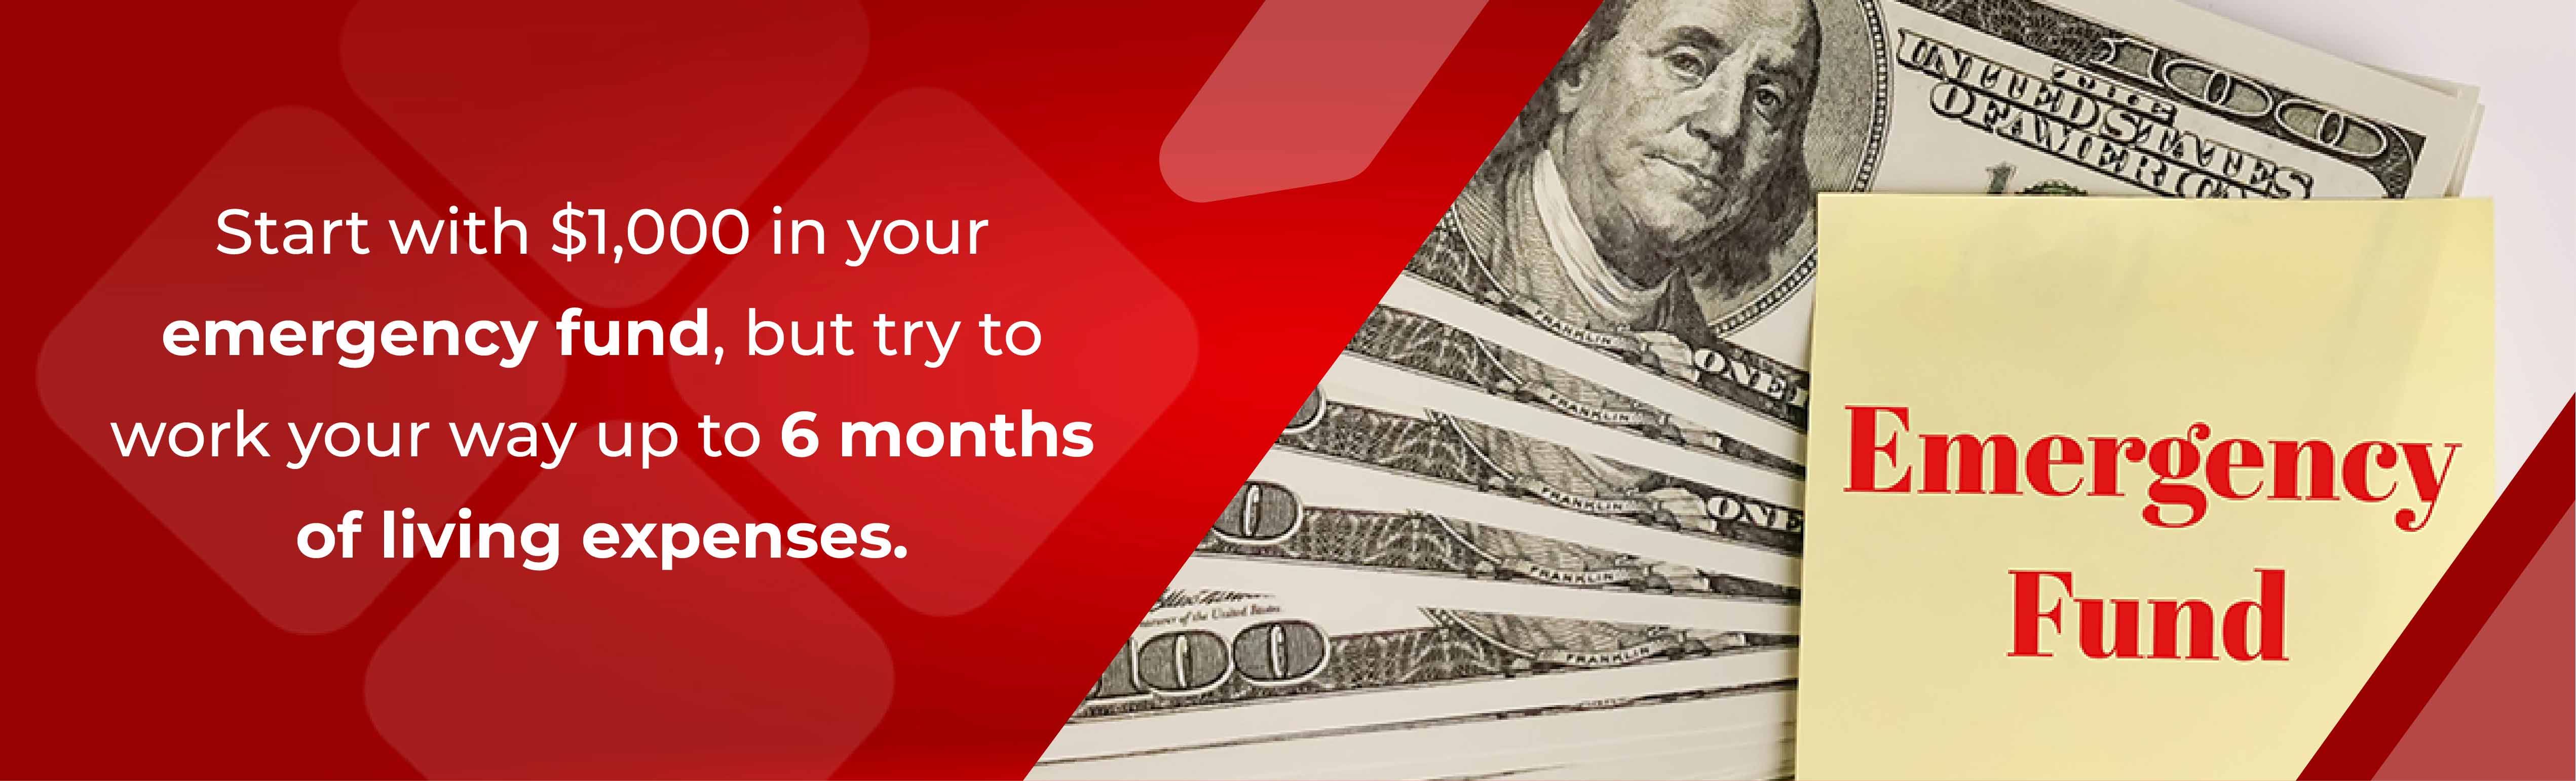 Start with $1,000 in your emergency fund, but try to work your way up to 6 months of living expenses.